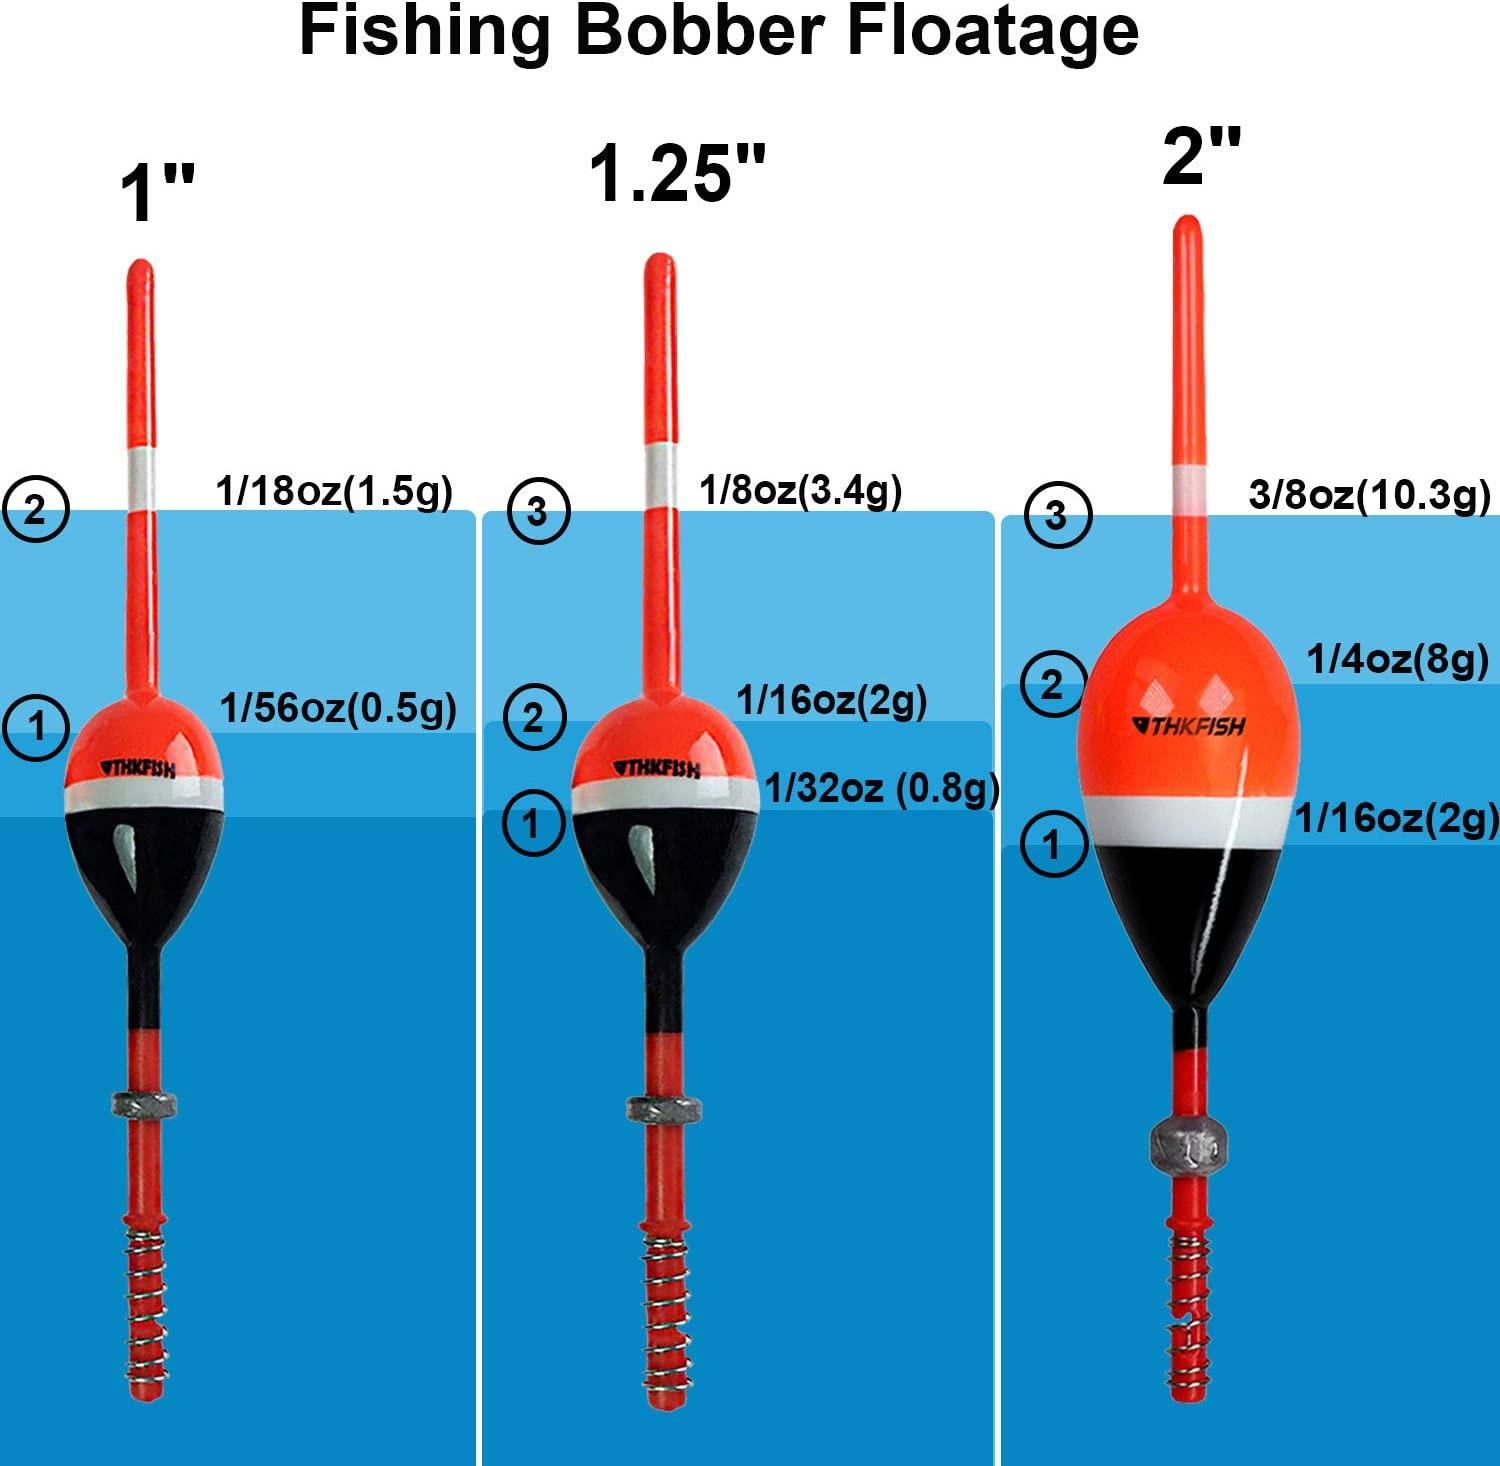 THKFISH Fishing Floats and Bobbers Balsa Wood Floats Spring Bobbers with  Oval Slip Bobbers for Crappie Panfish Walleyes Fixed Bobber (1X0.7X6)  (1.25X0.75X6) (2X1.14X5.86) 5pcs C-2in X 1.14in X 5.86in - 5pcs